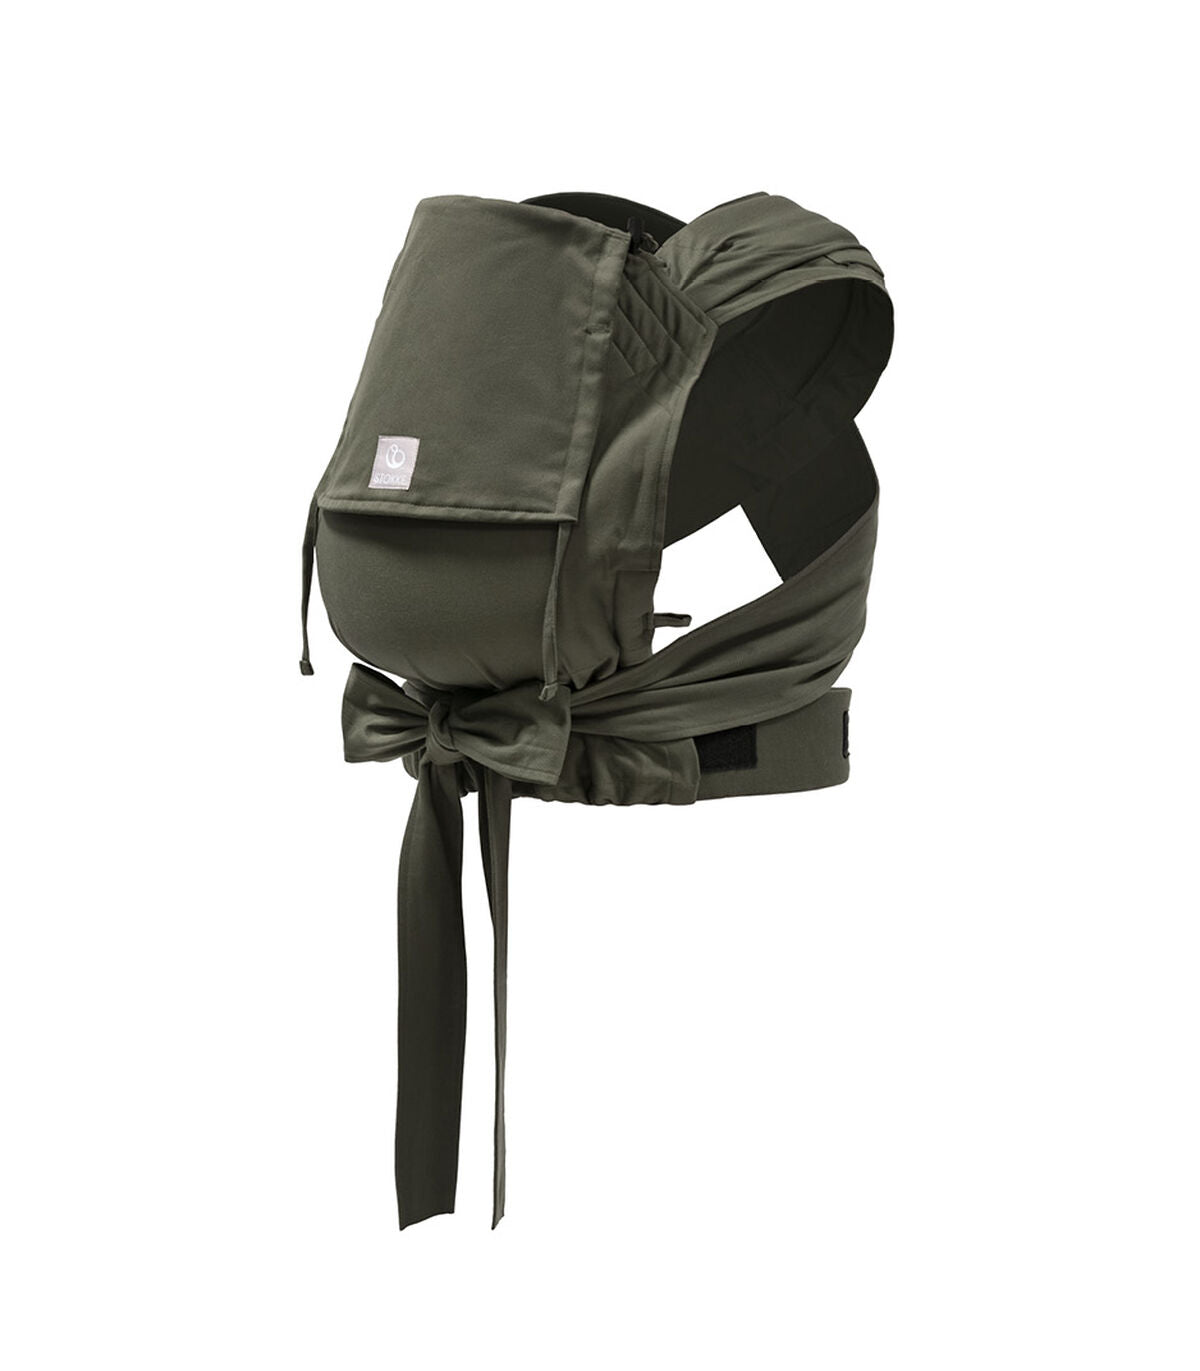 Stokke Limas Carrier - ANB Baby -$100 - $300